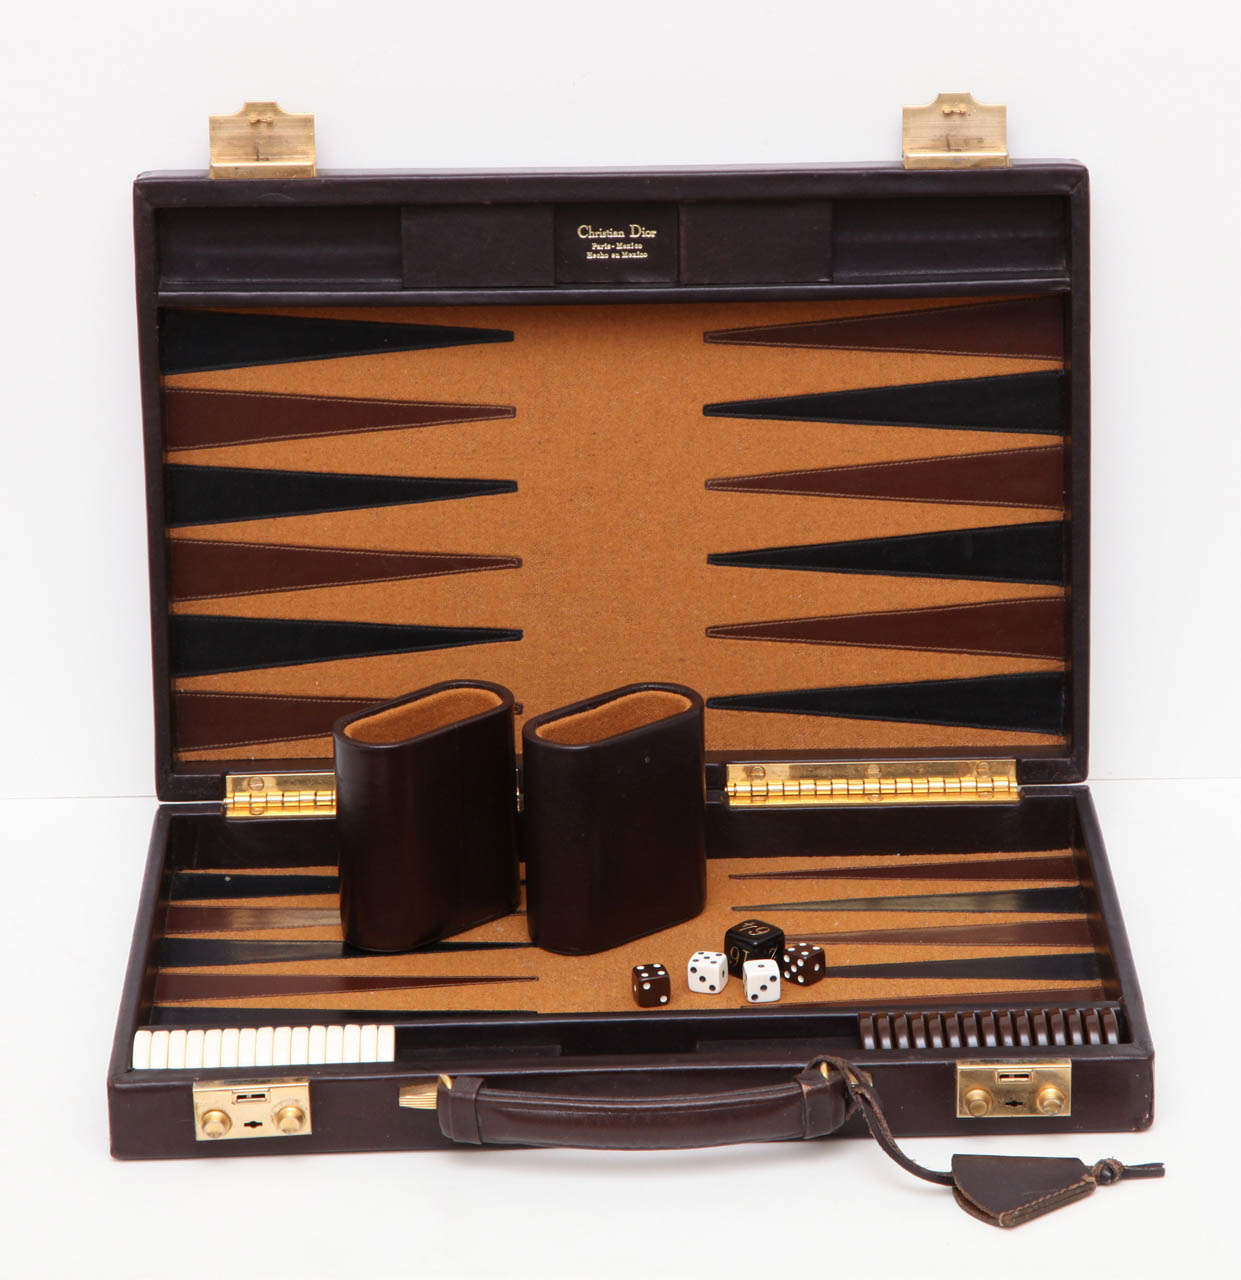 A vintage Christian Dior backgammon set in a Dior logo leather case with brass fittings. The game contains the original pieces including two leather cups.